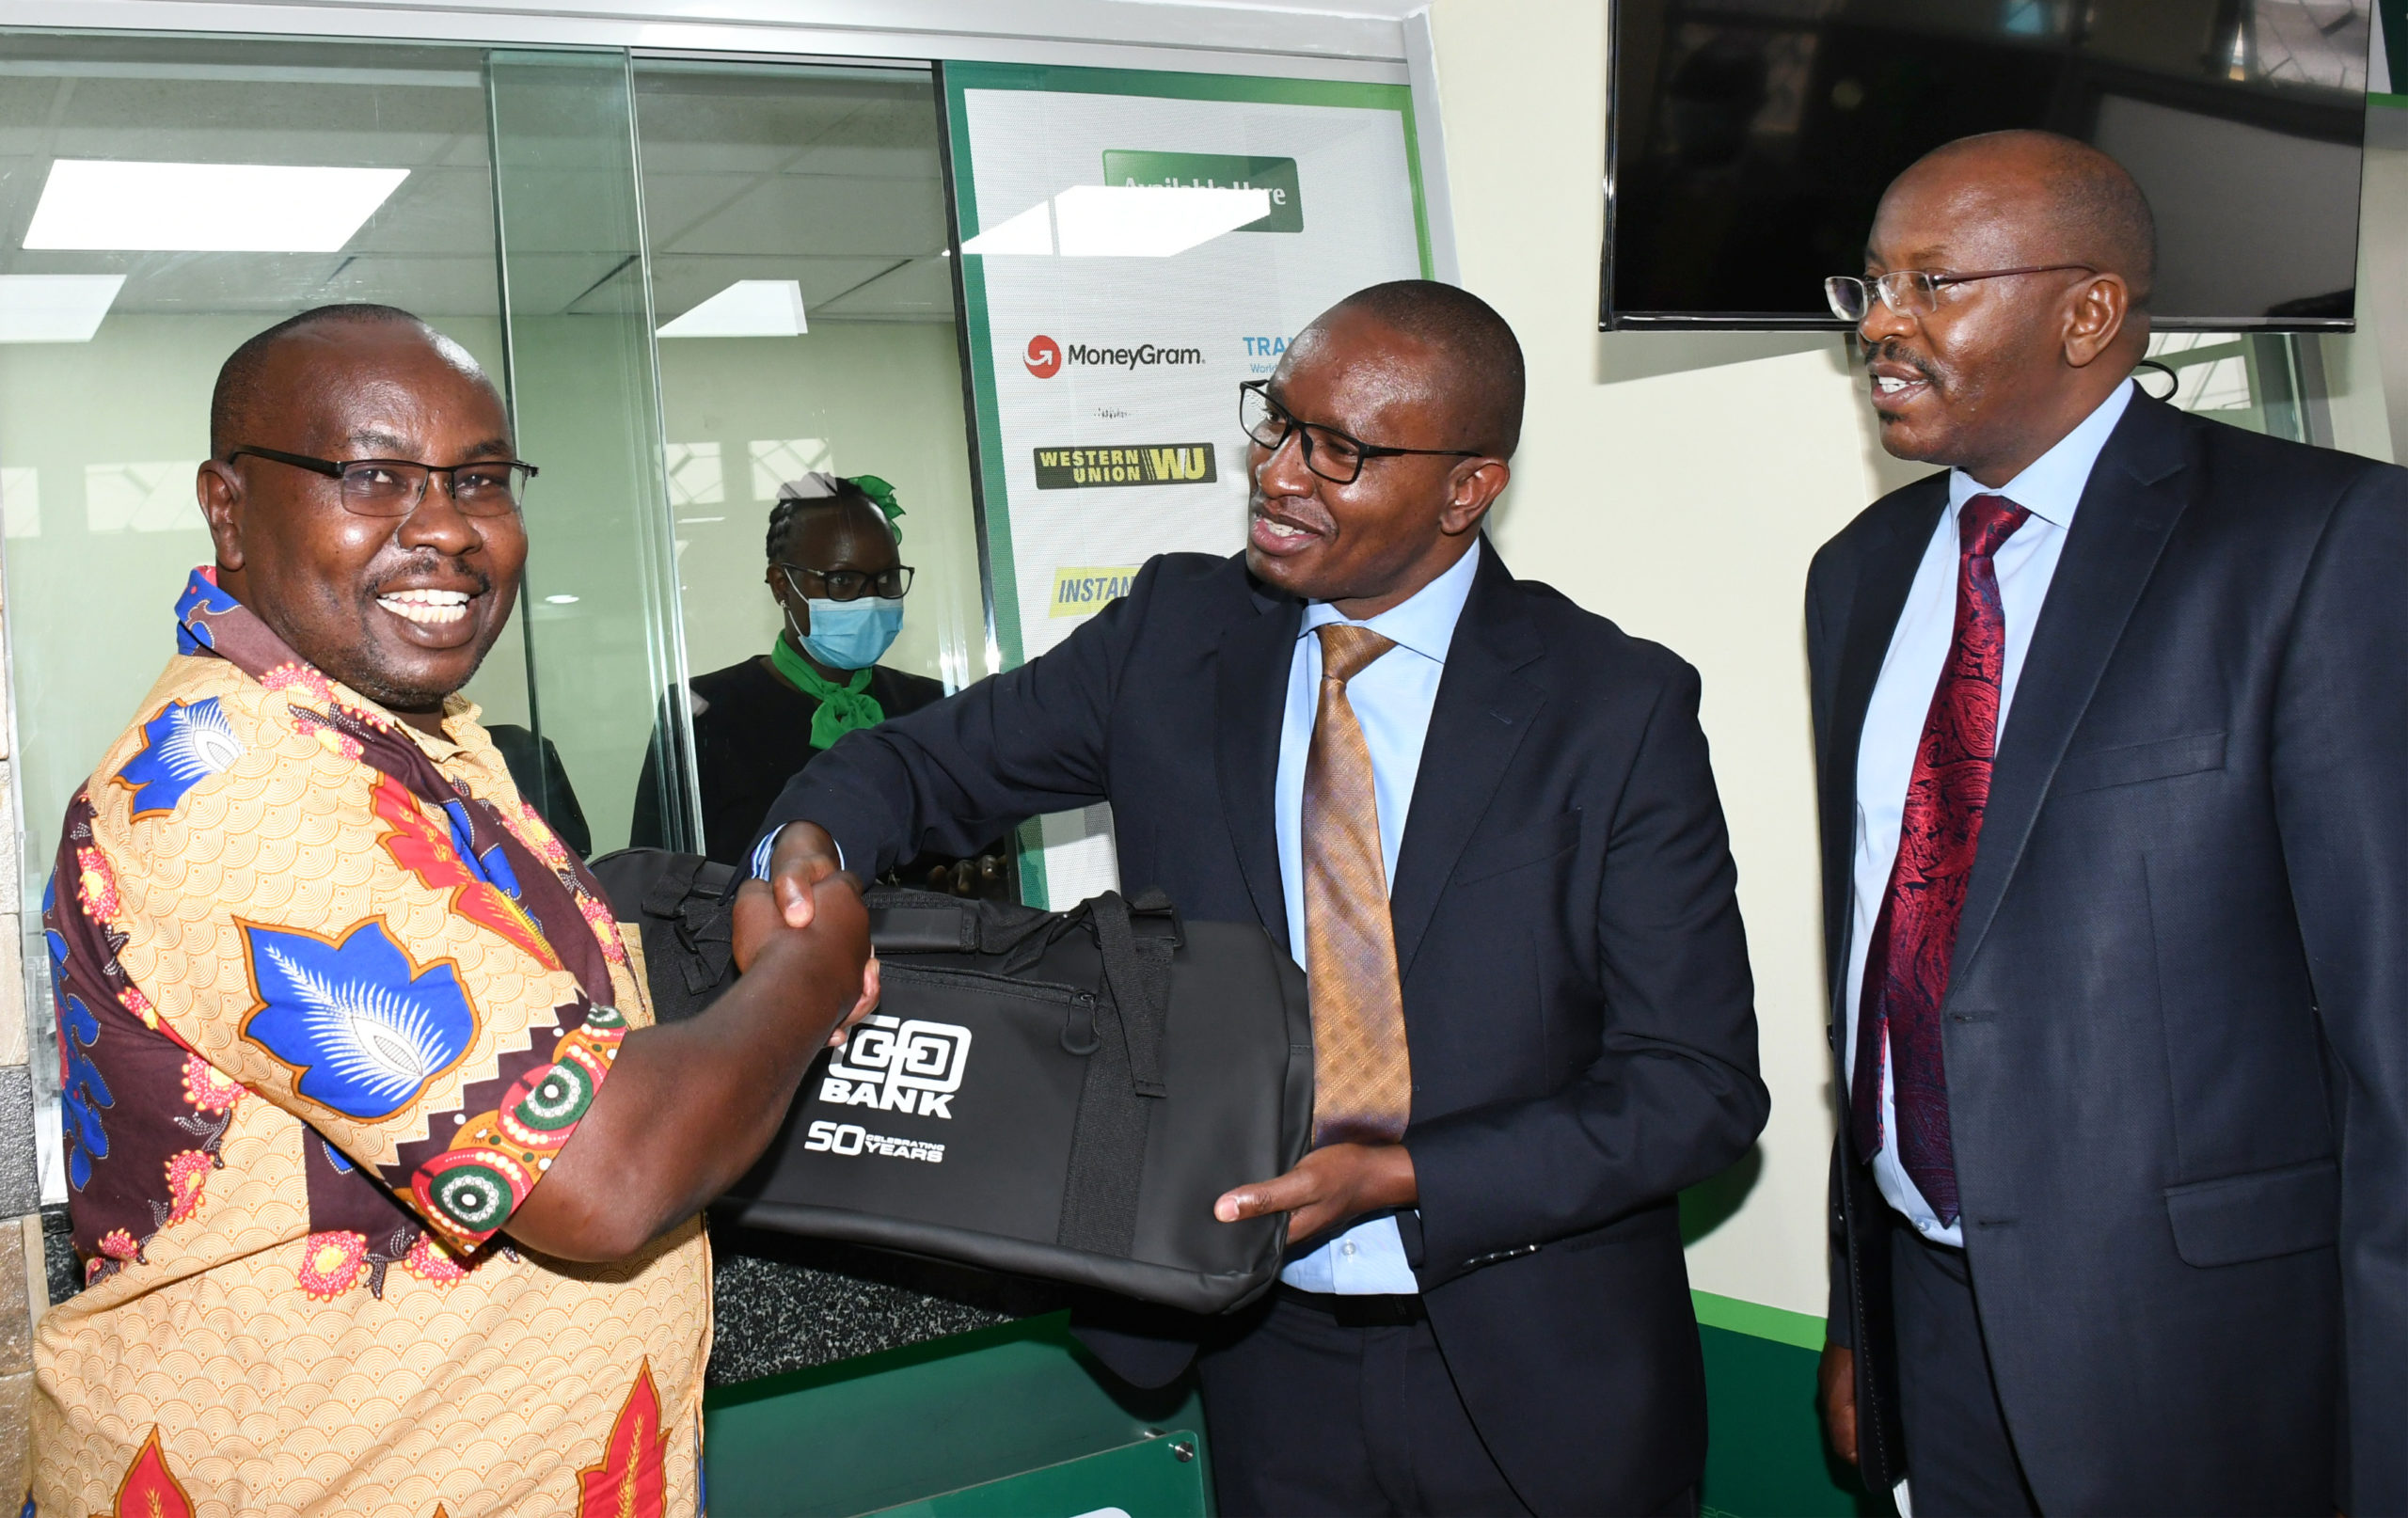 Director Retail & Business Banking William Ndumia presents a gift to Mr. who was the first client to open an account after the official opening of Co-op Kamulu branch Mr Joseph Kimathi Ndegwa . Looking on is the bank's Head of Branch Banking Peter Kirugu.